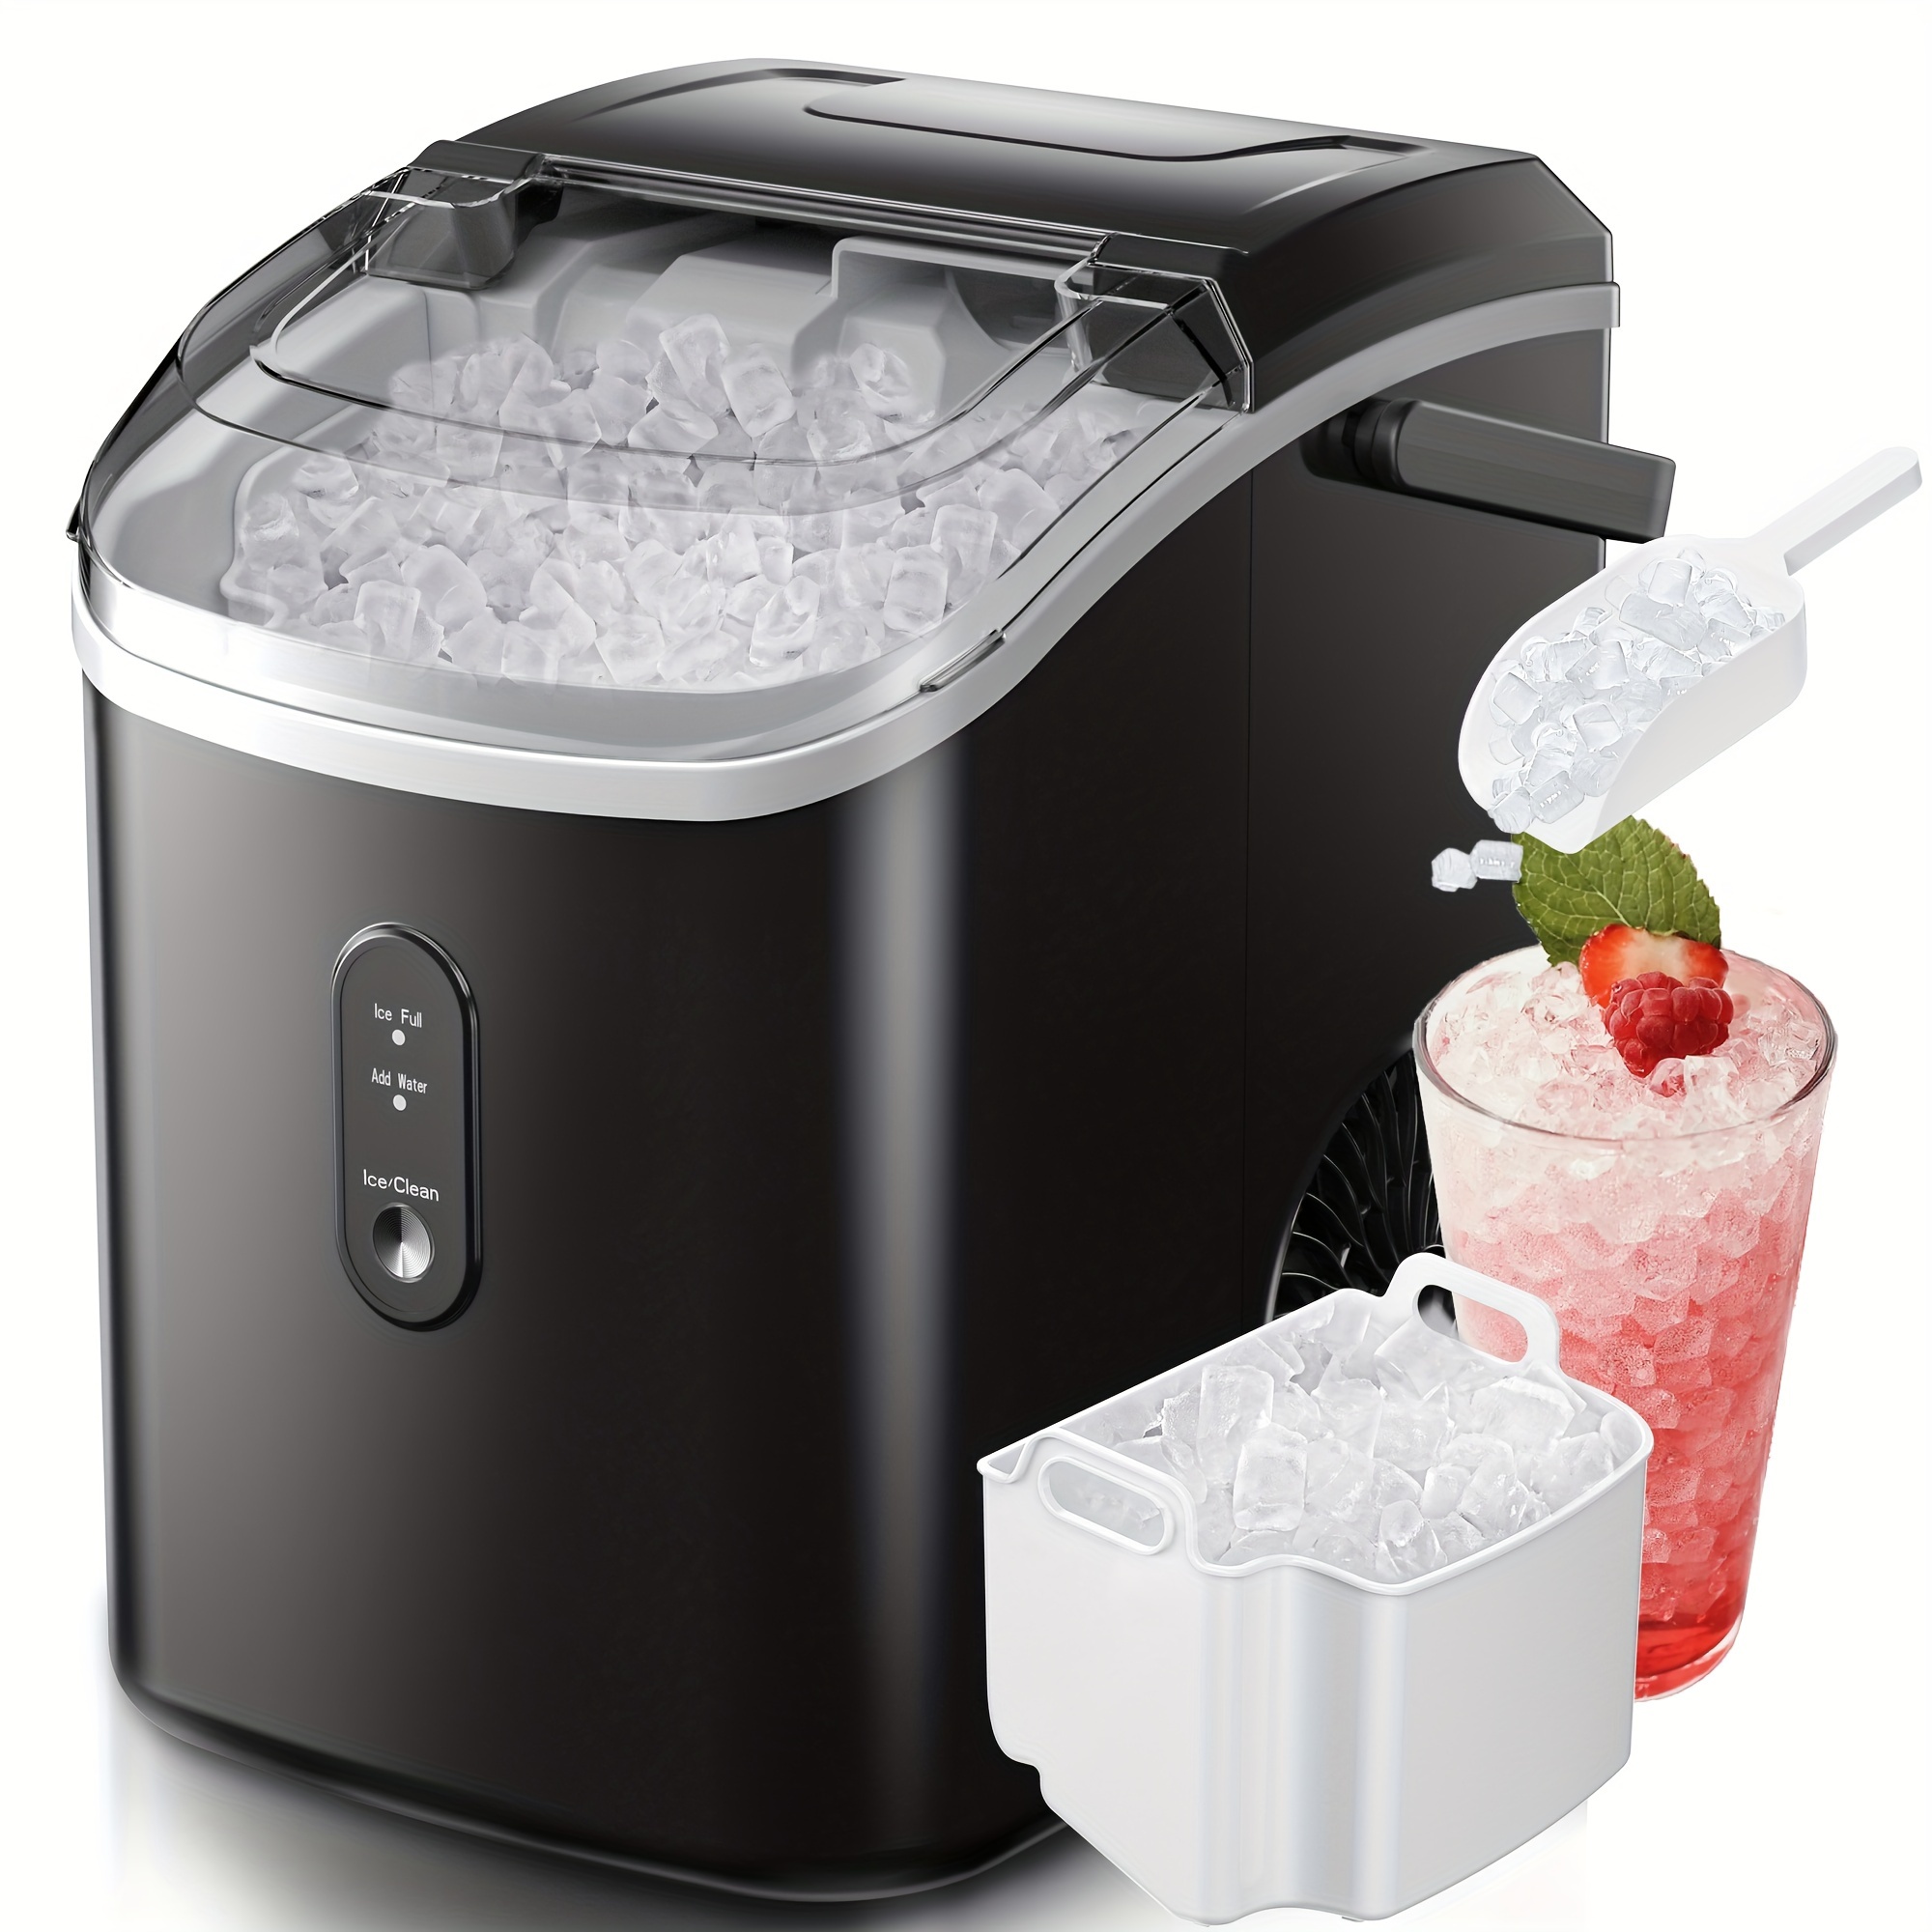 

Countertop With Handle, Ready In 6 Mins, 34lbs/24h, Removable Top Cover, Auto-cleaning, Portable Ice Maker With Basket And Scoop, For Home/party/rv/camping. (black)